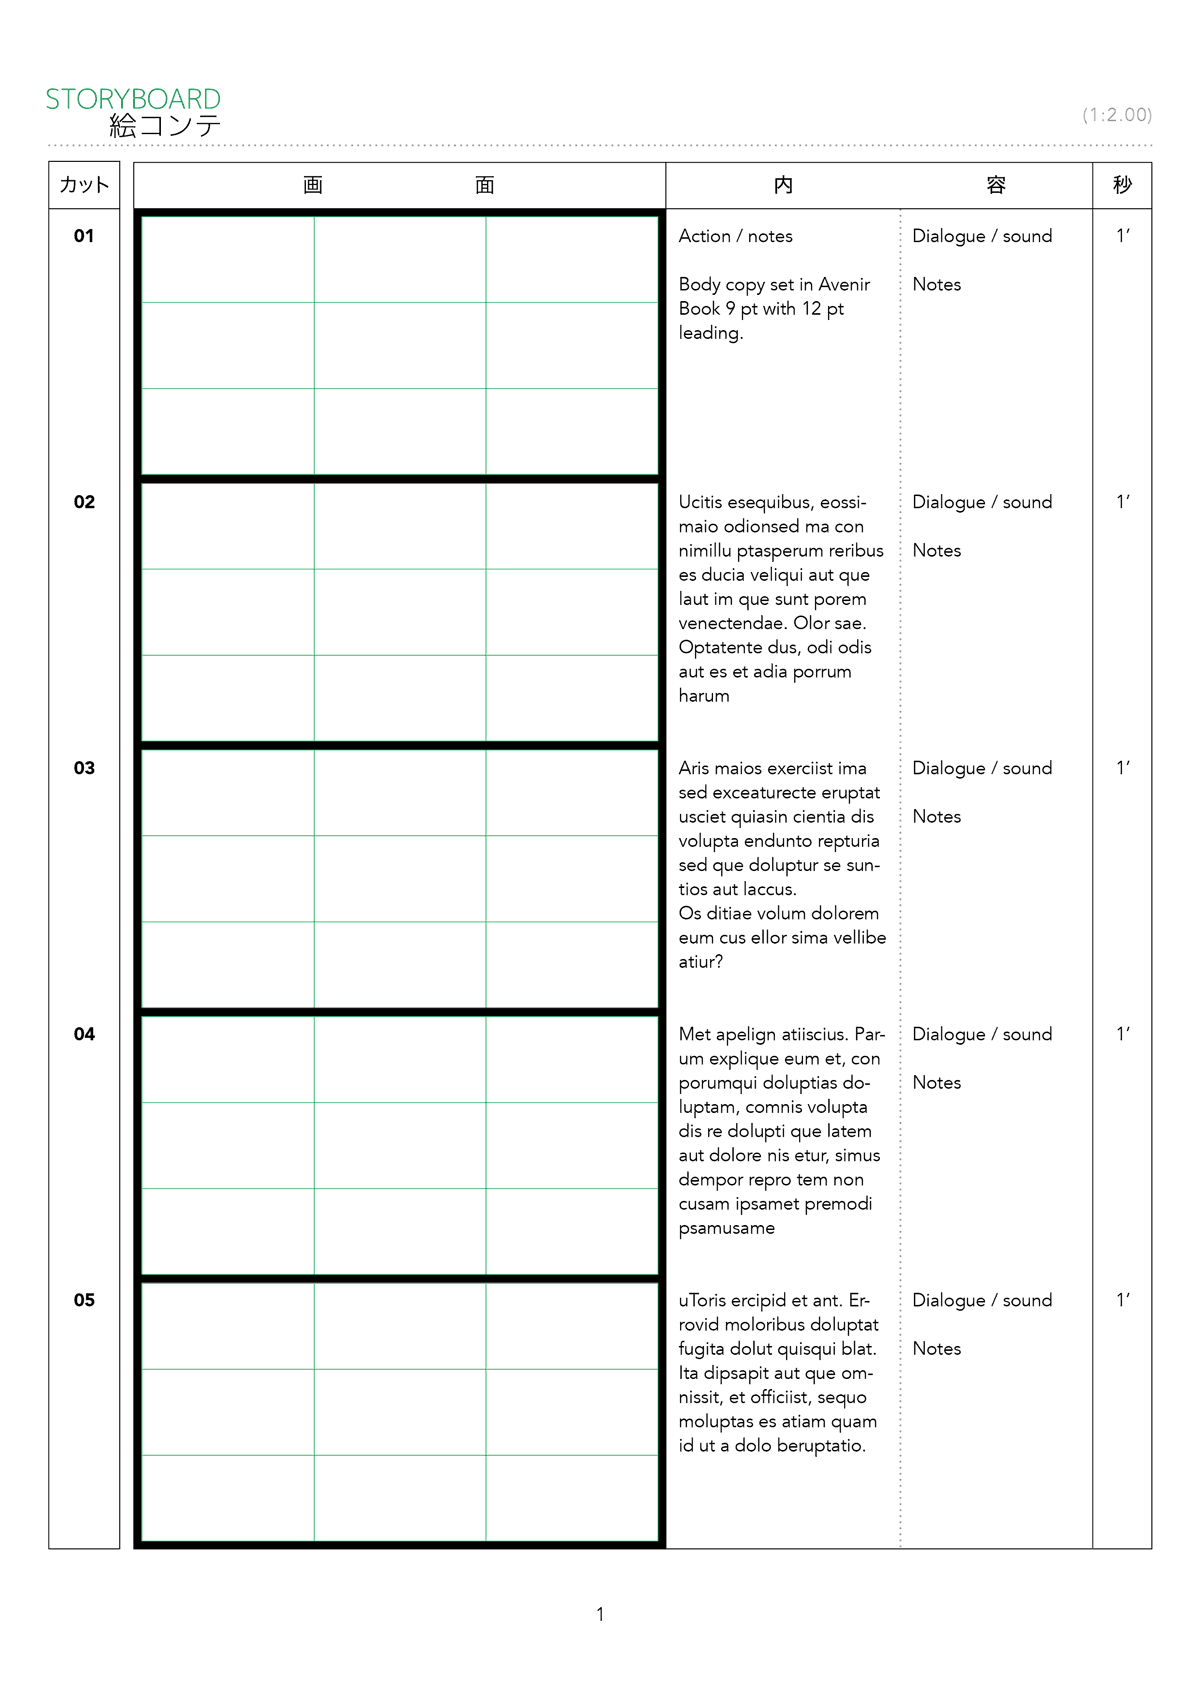 InDesign Japanese anime storyboard template 2:1 Avenir Book on A4 vertical